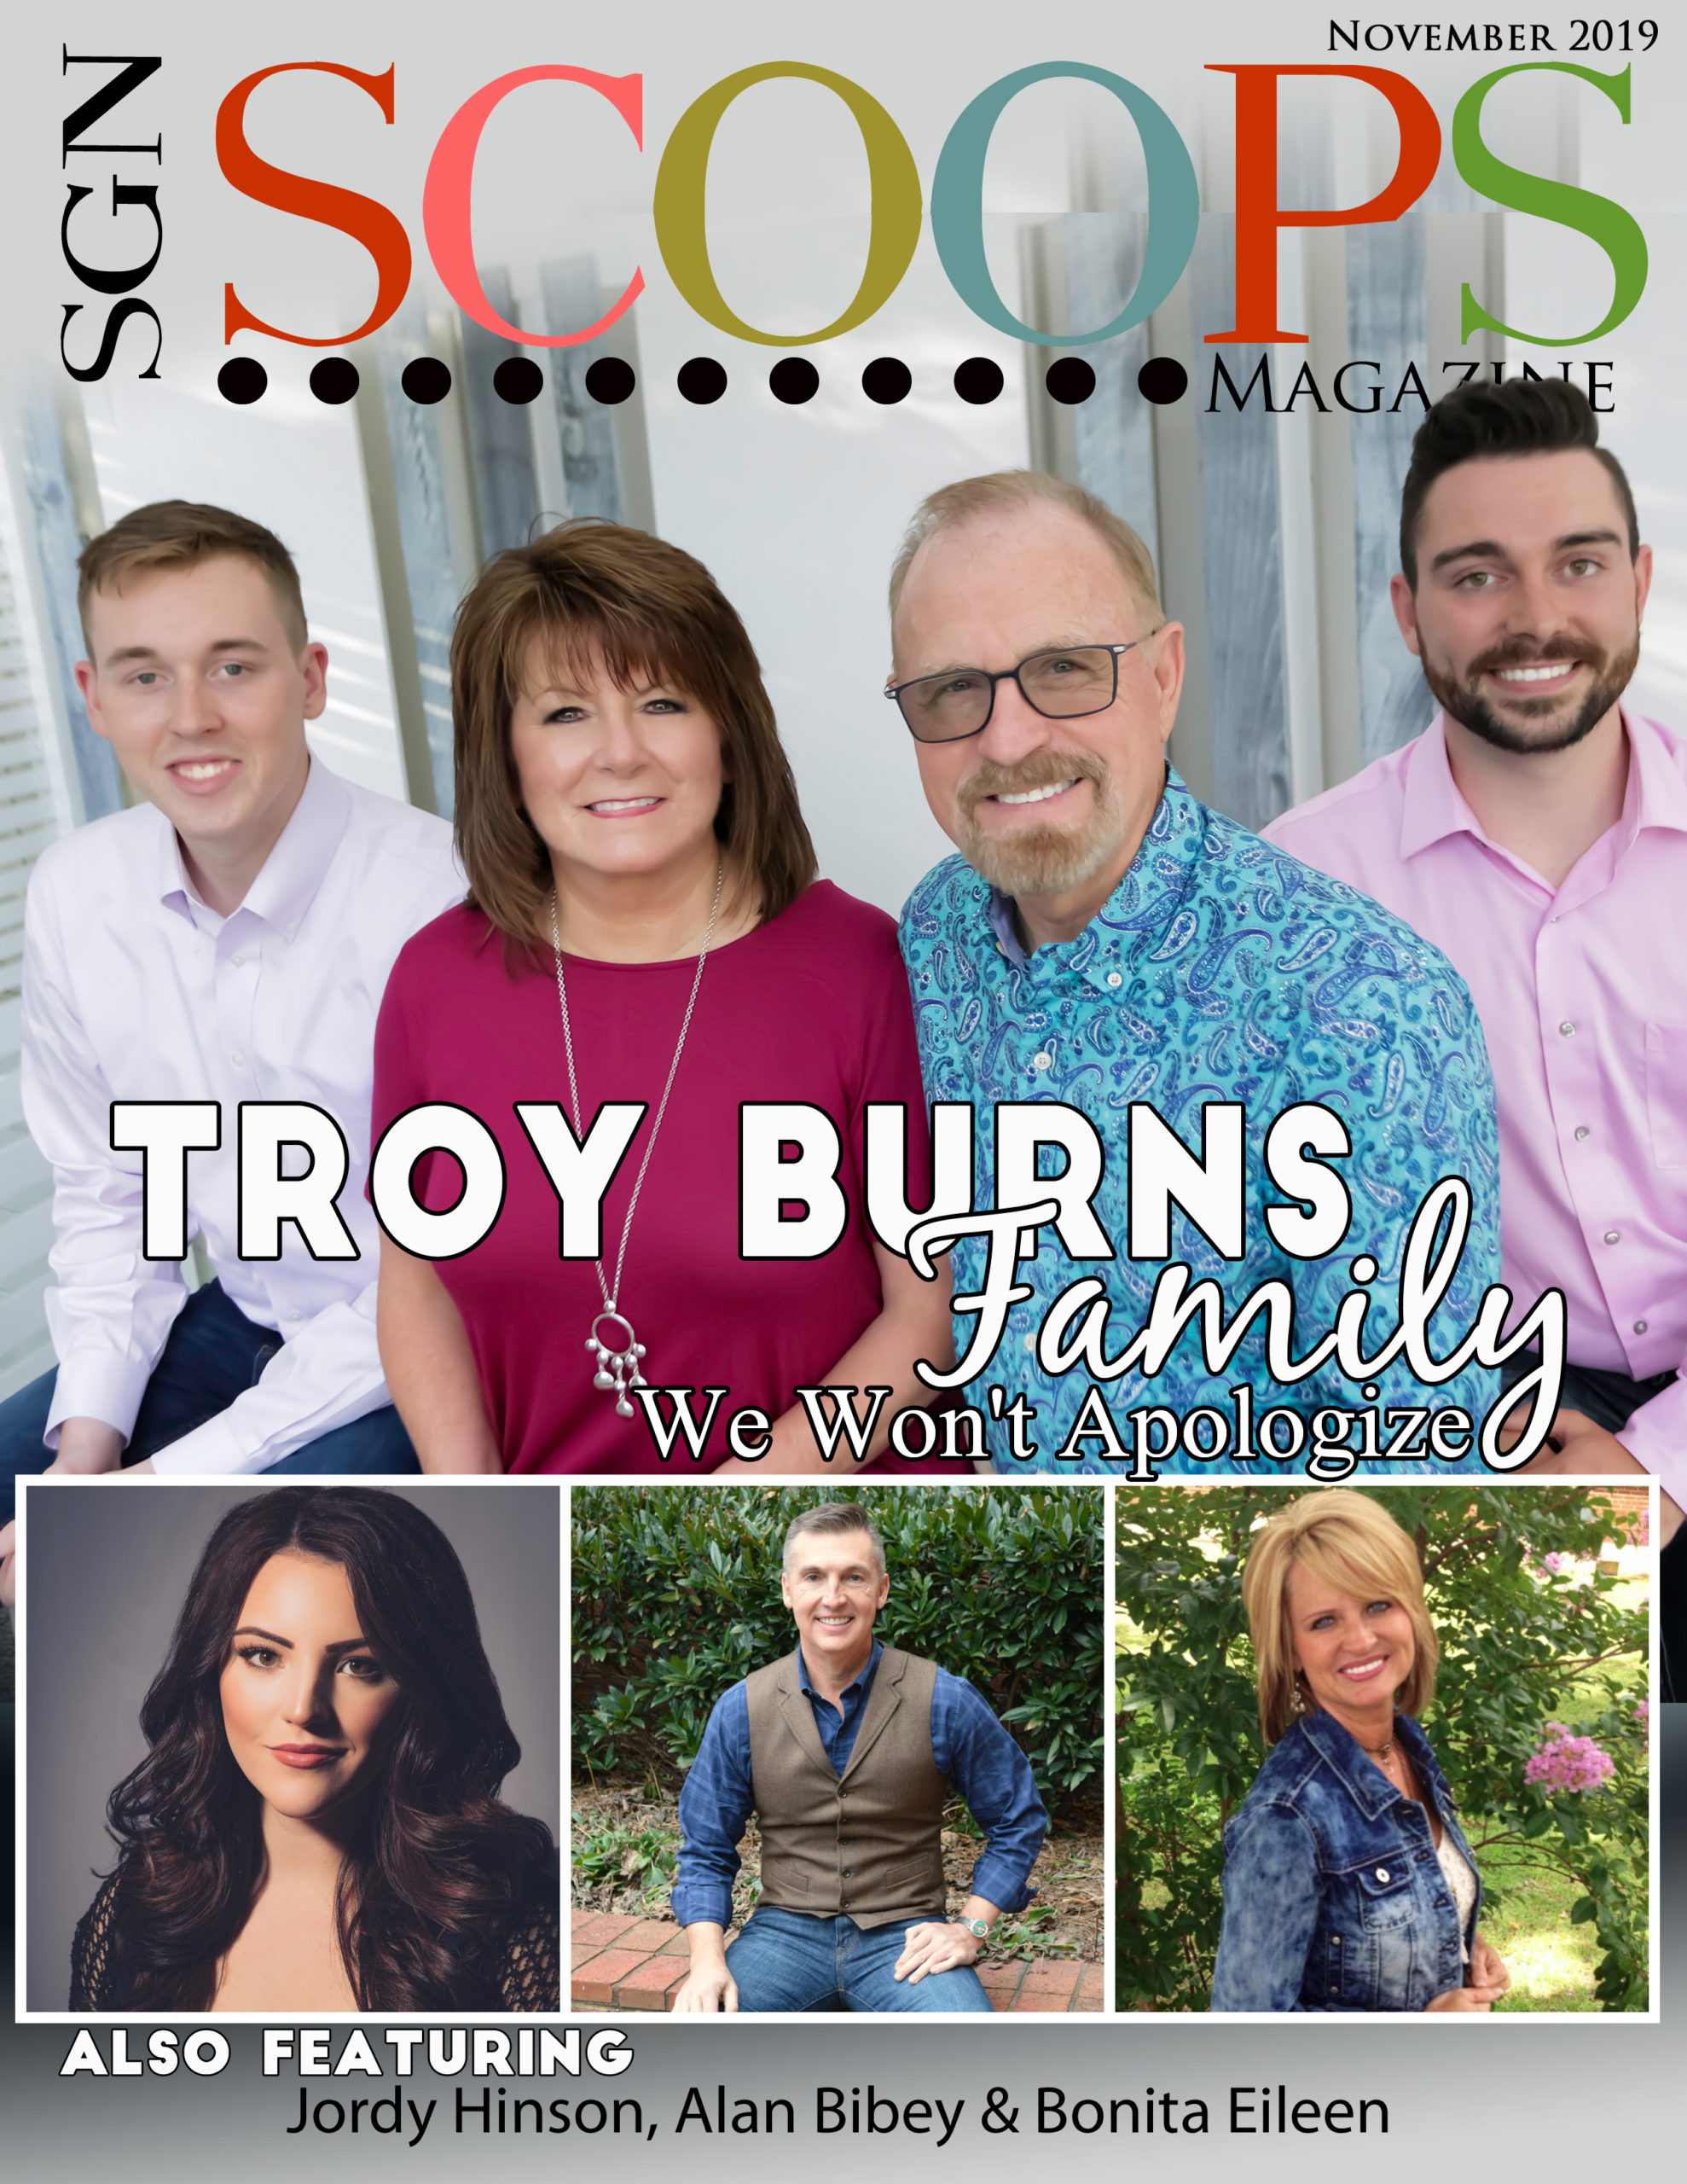 Southern Gospel Charts 2016